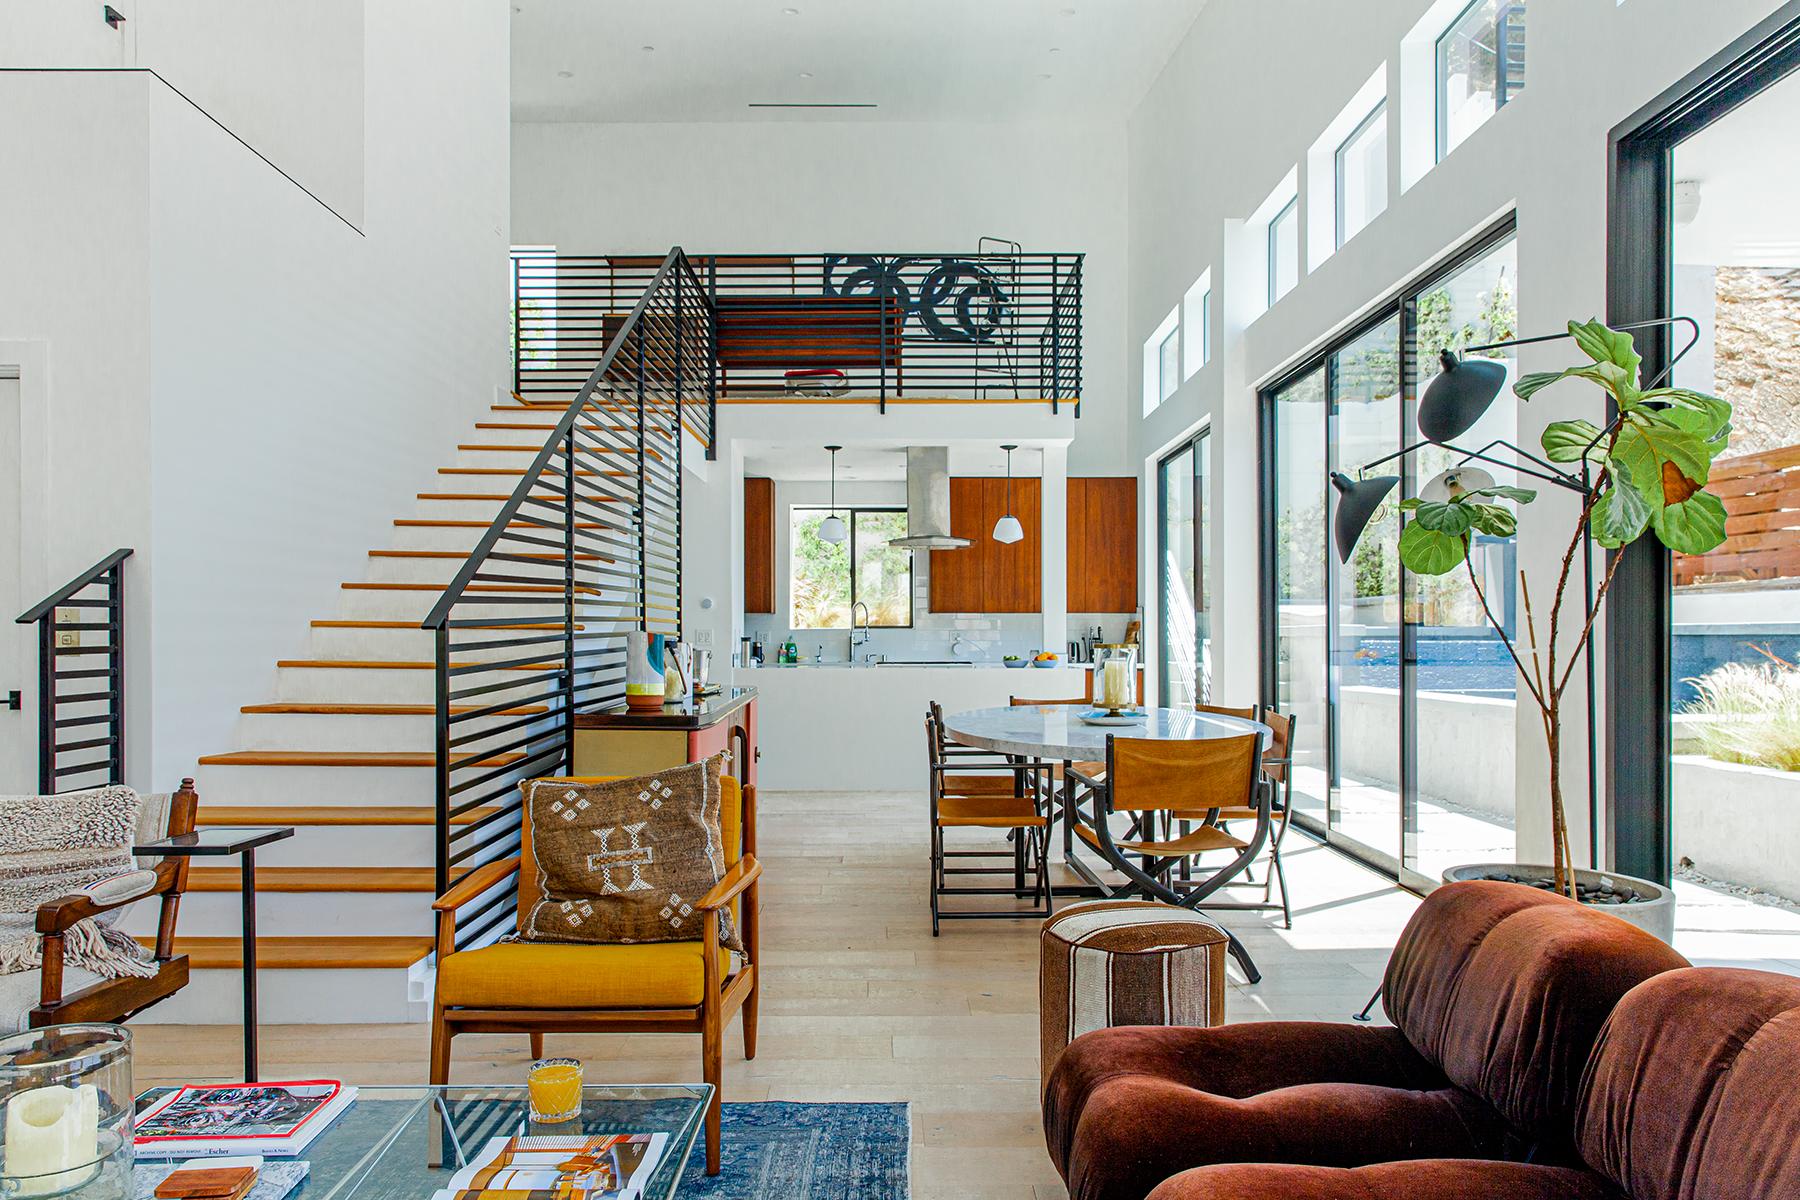 A 2 Story Air BnB Interior with a wooden staircase and black balustrades and glass window